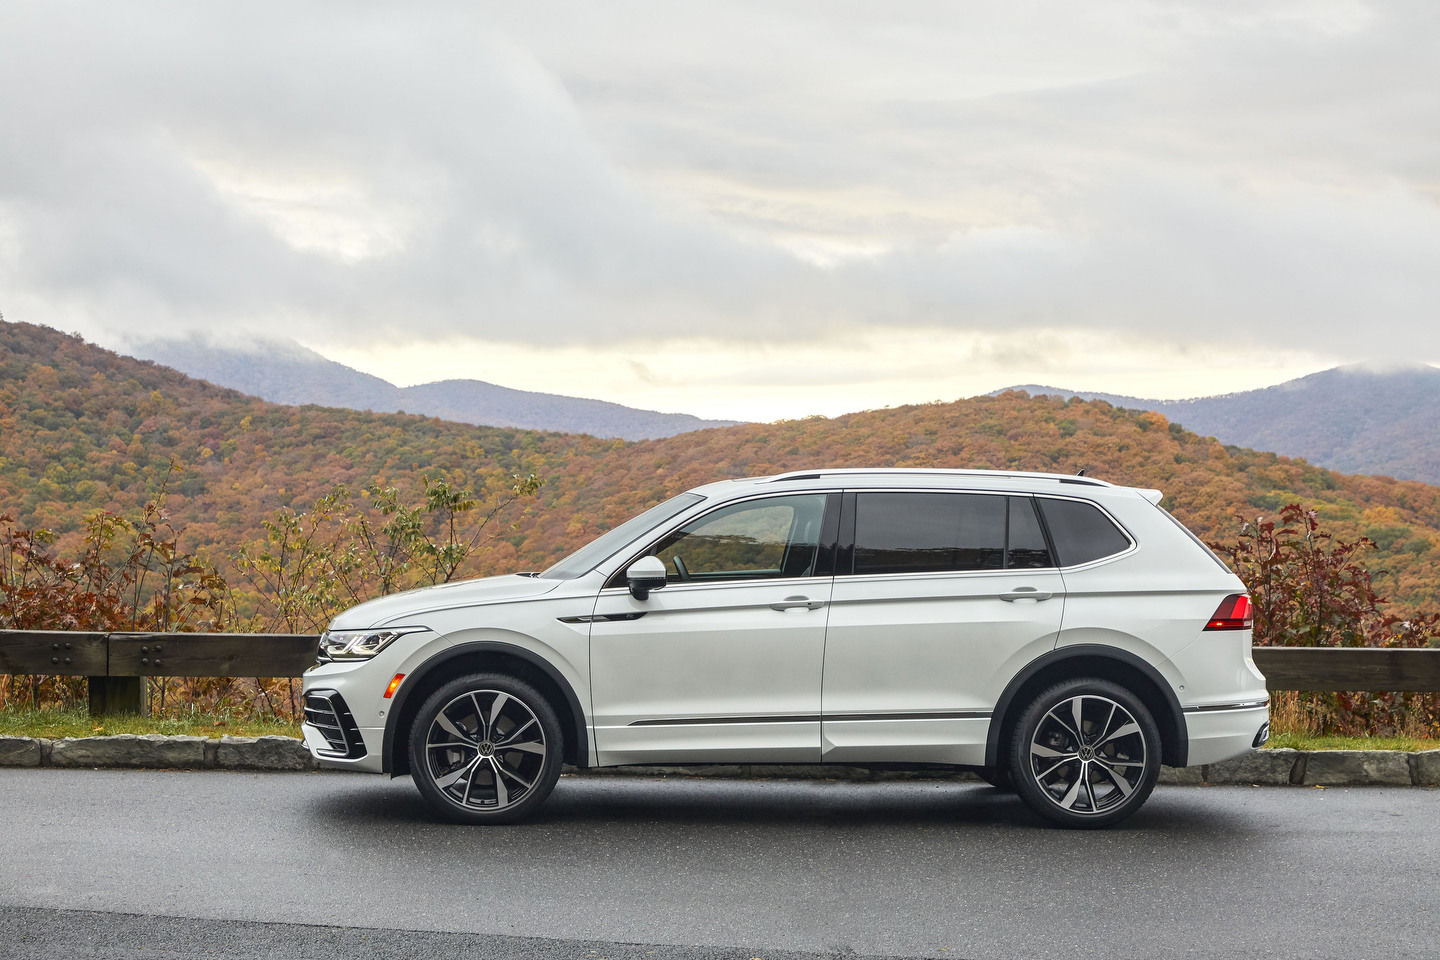 2022 Volkswagen Tiguan vs. 2022 Mitsubishi Outlander: More Power and Style in the Tiguan